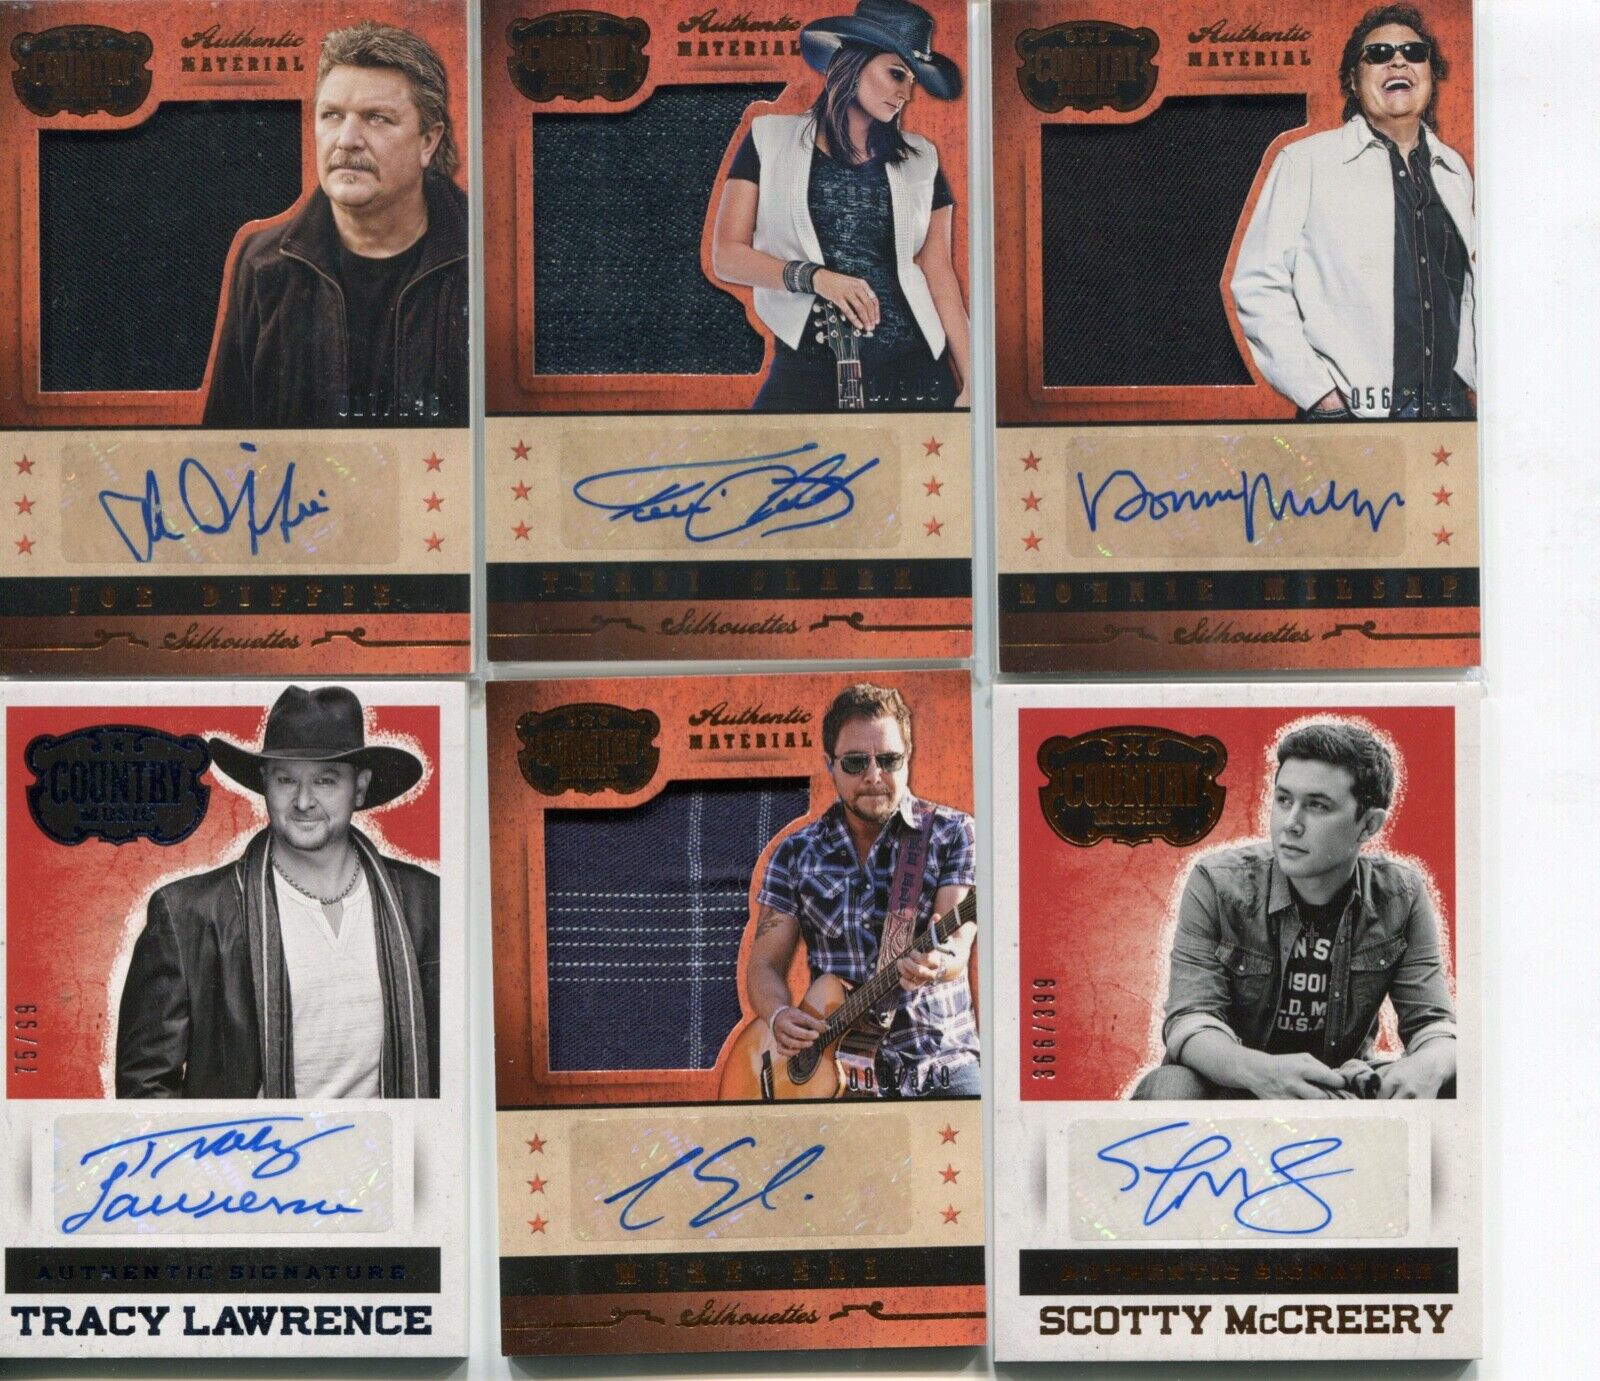 2014 Panini Country Music Certified Autograph Card